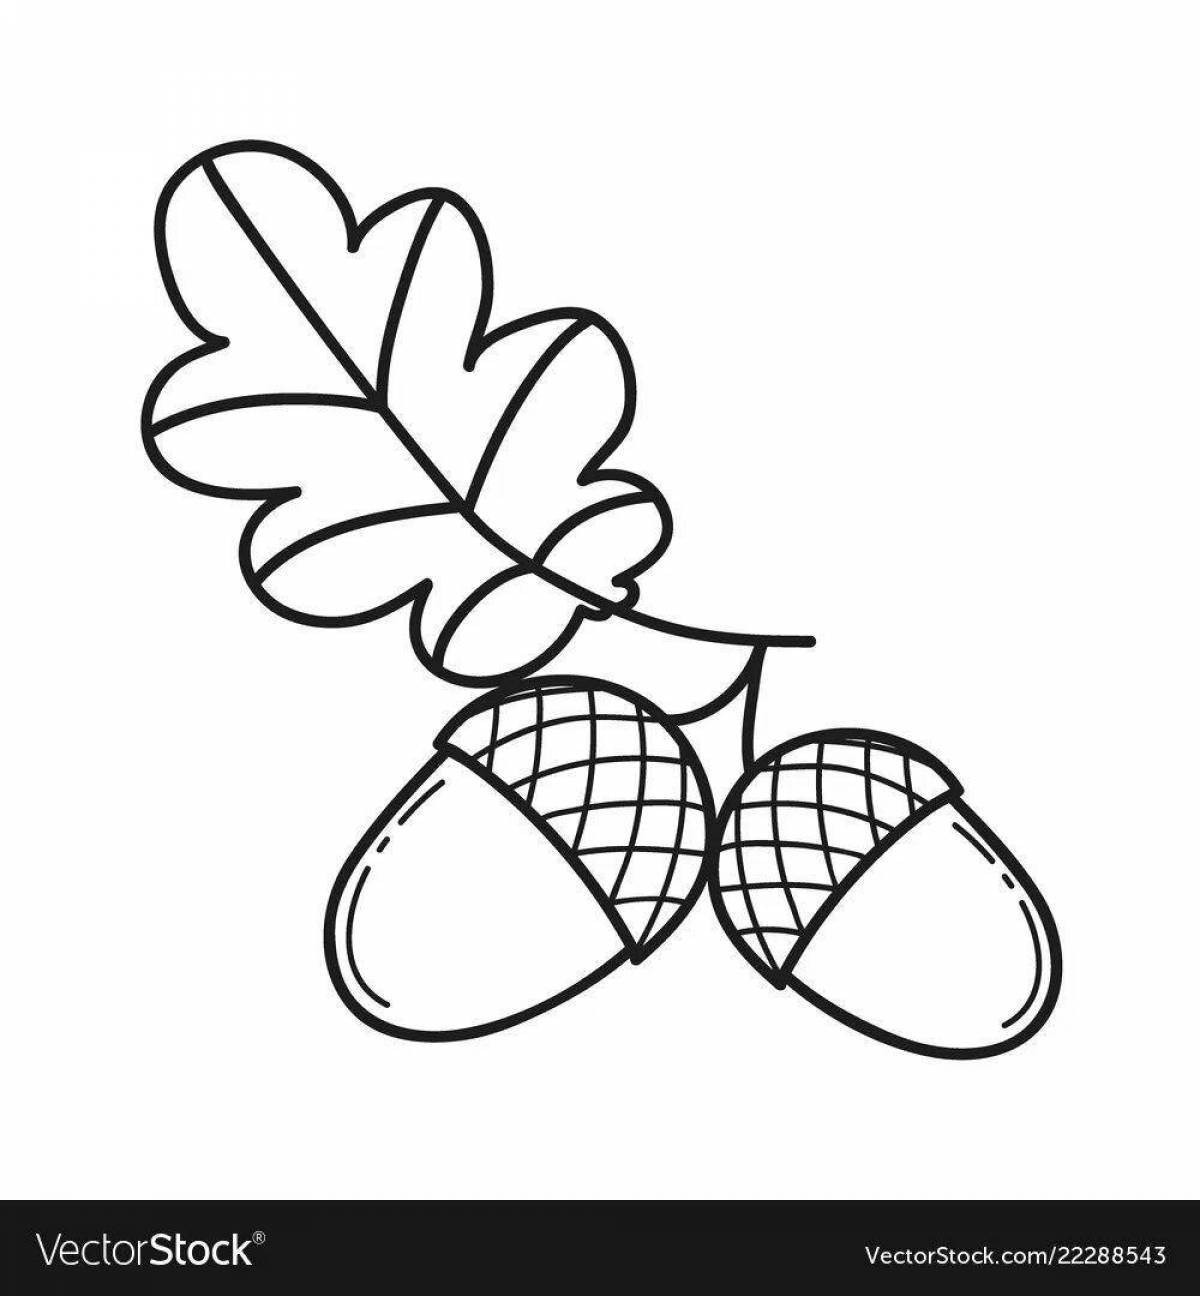 Awesome acorn coloring page